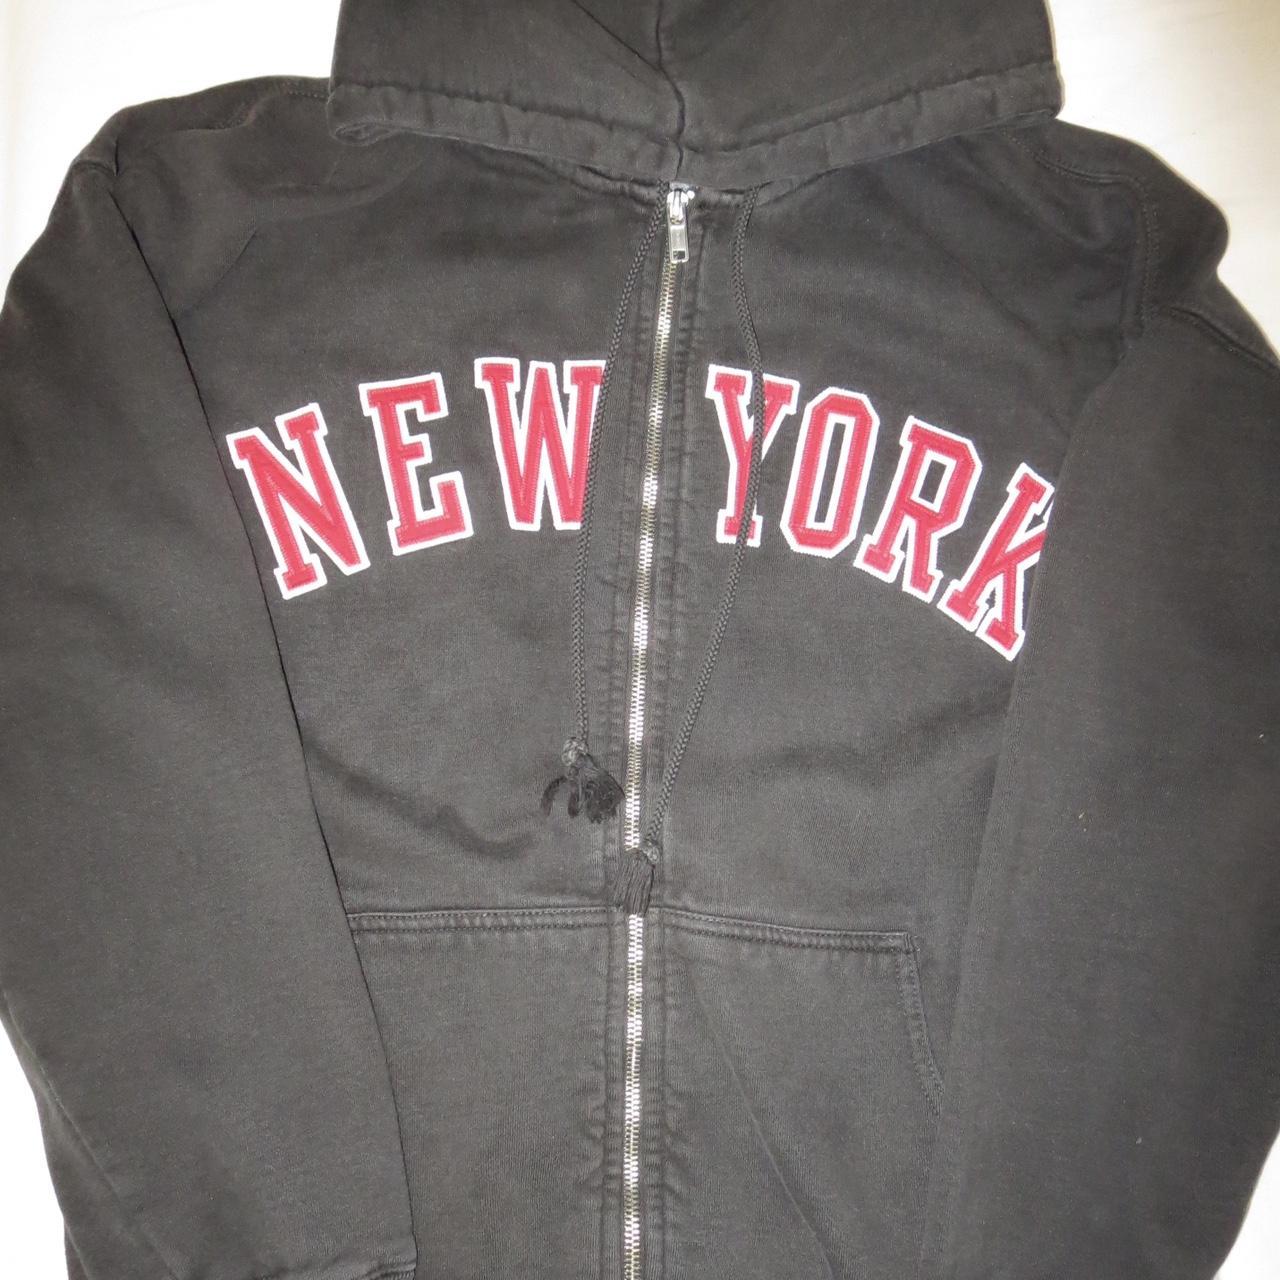 brandy melville black and red new york christy hoodie